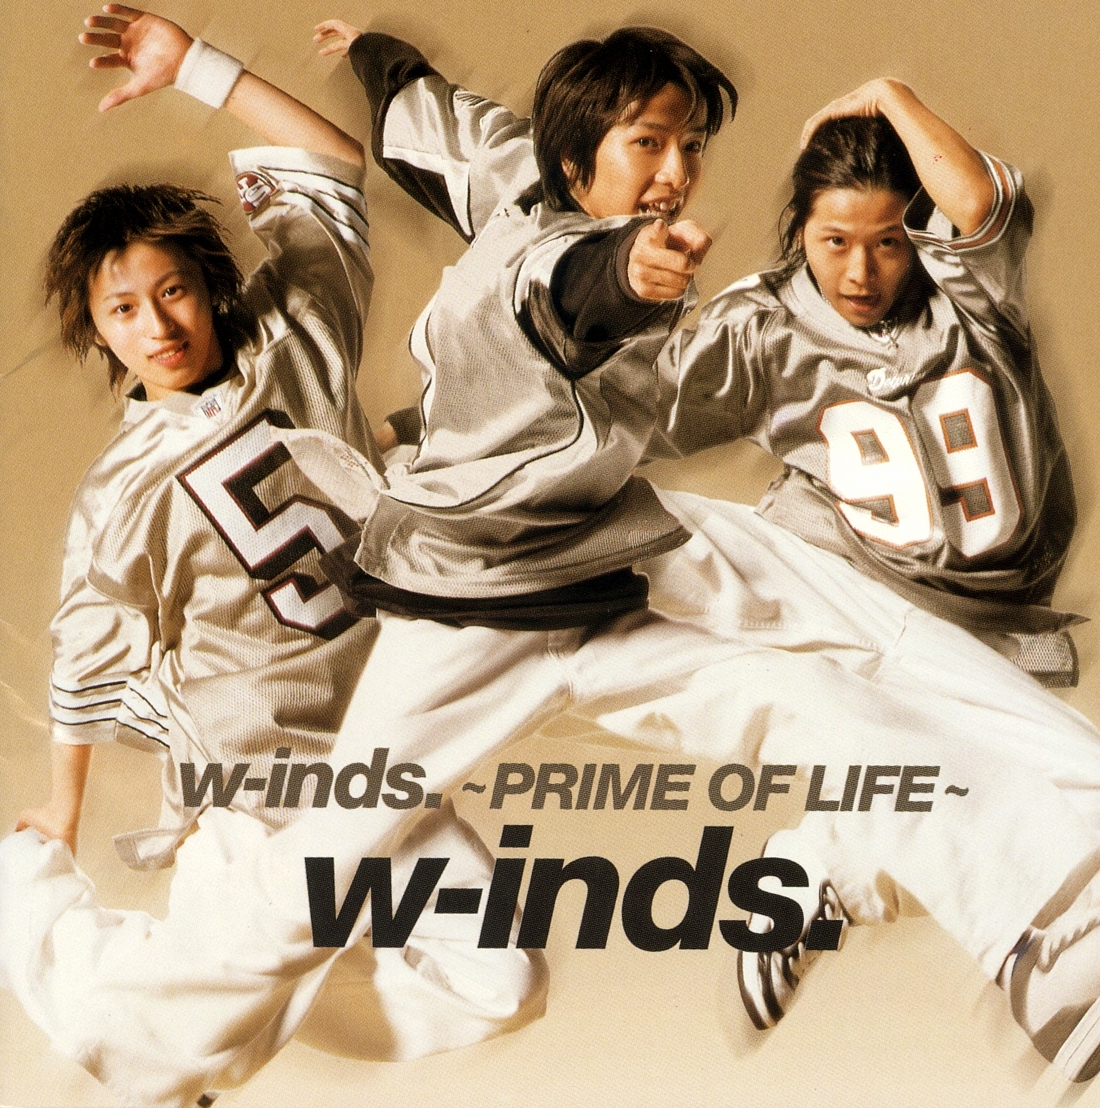 w-inds. ～PRIME OF LIFE～